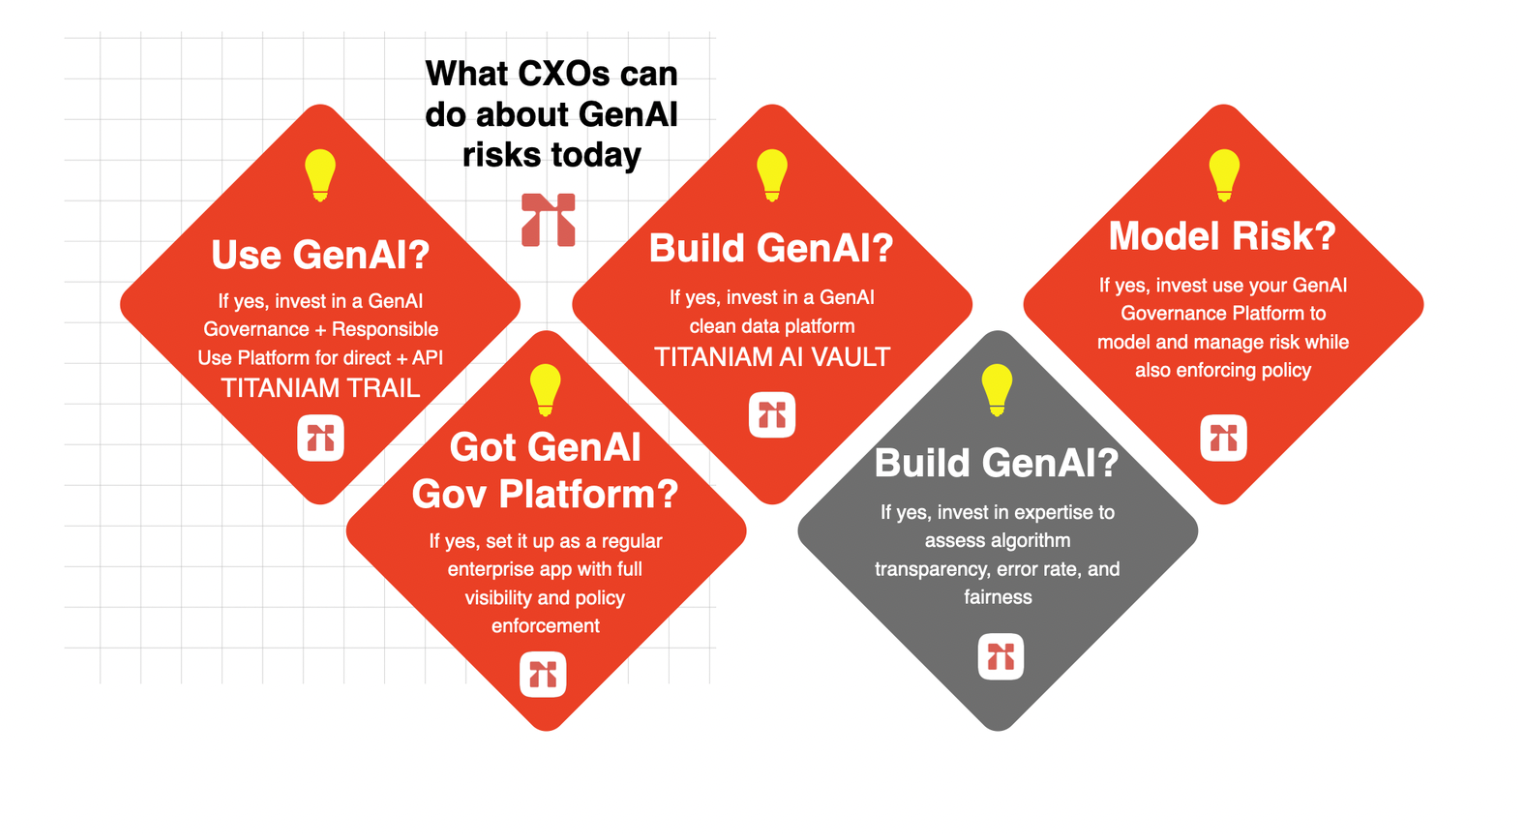 : Immediate steps CXO can take towards creating and enforcing a GenAI Governance + Responsible Use Strategy